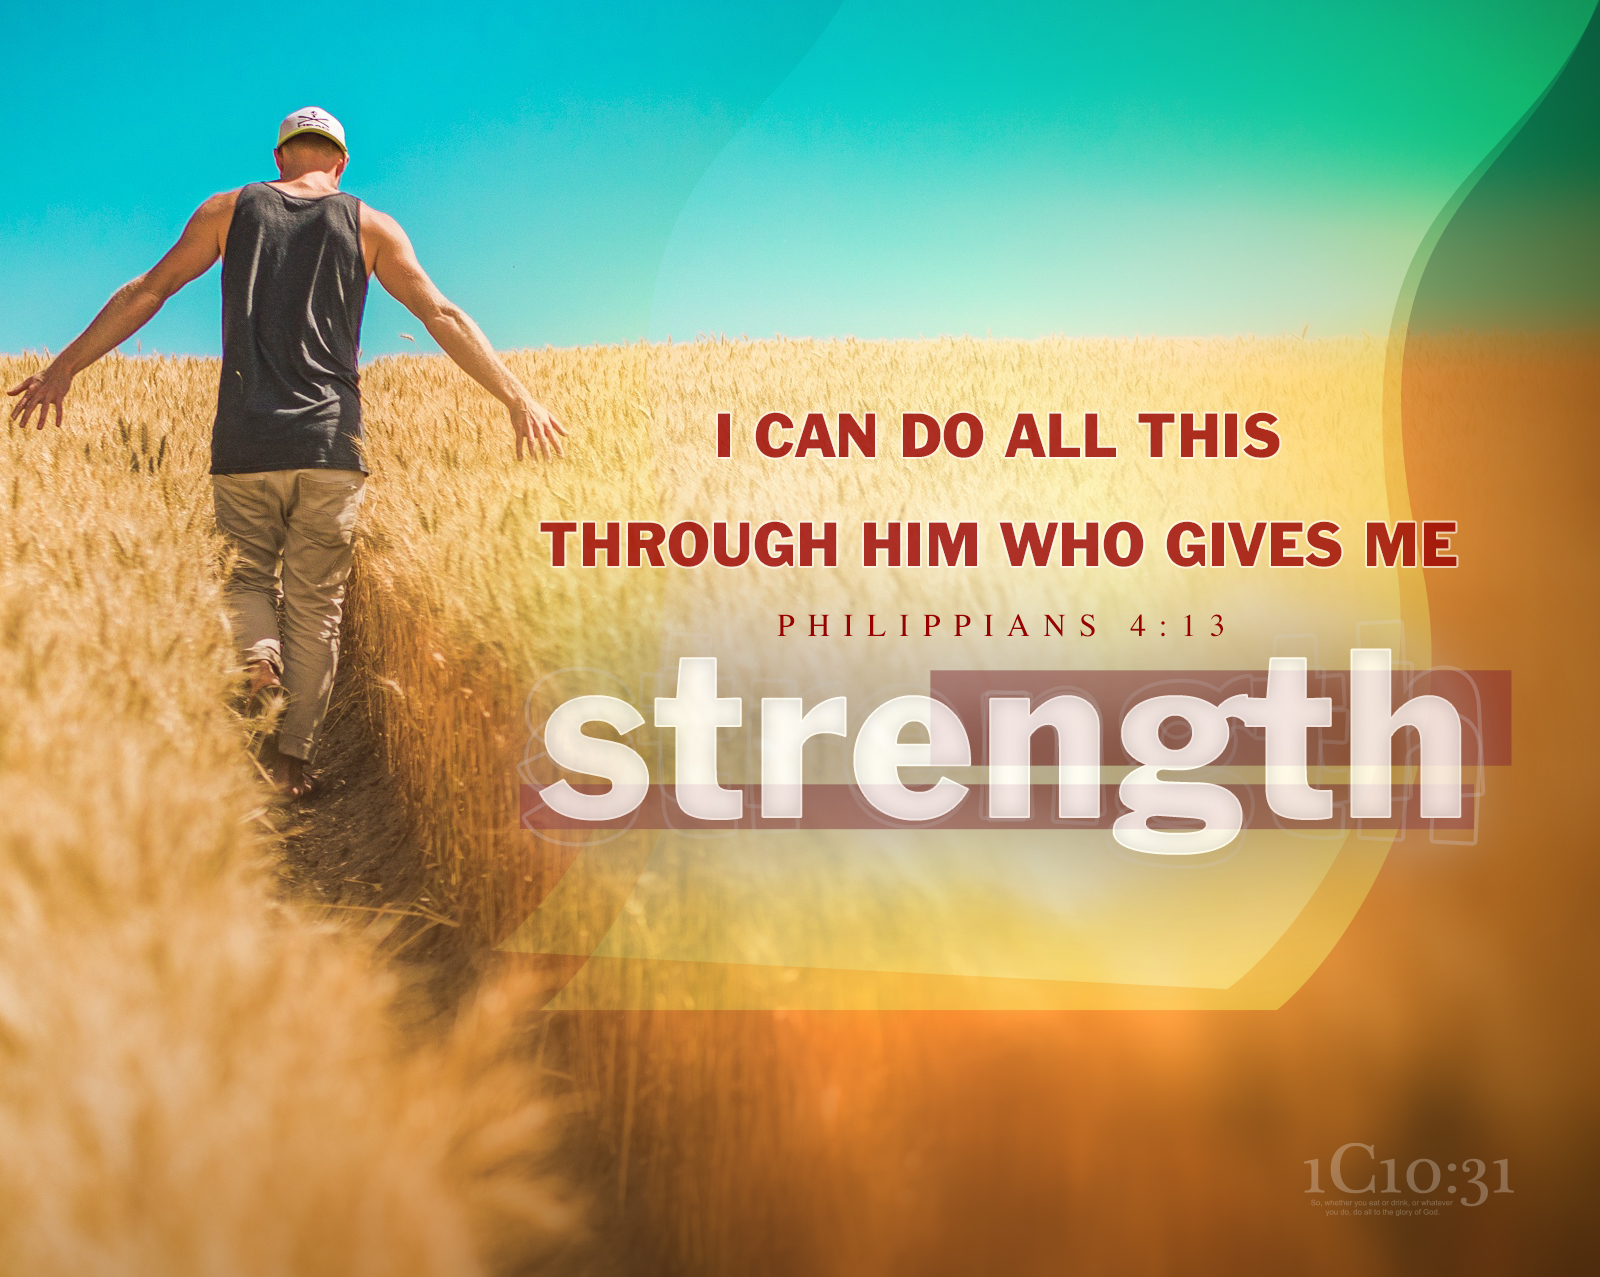 Philippians 4:13 I can do all this through him who gives me strength.